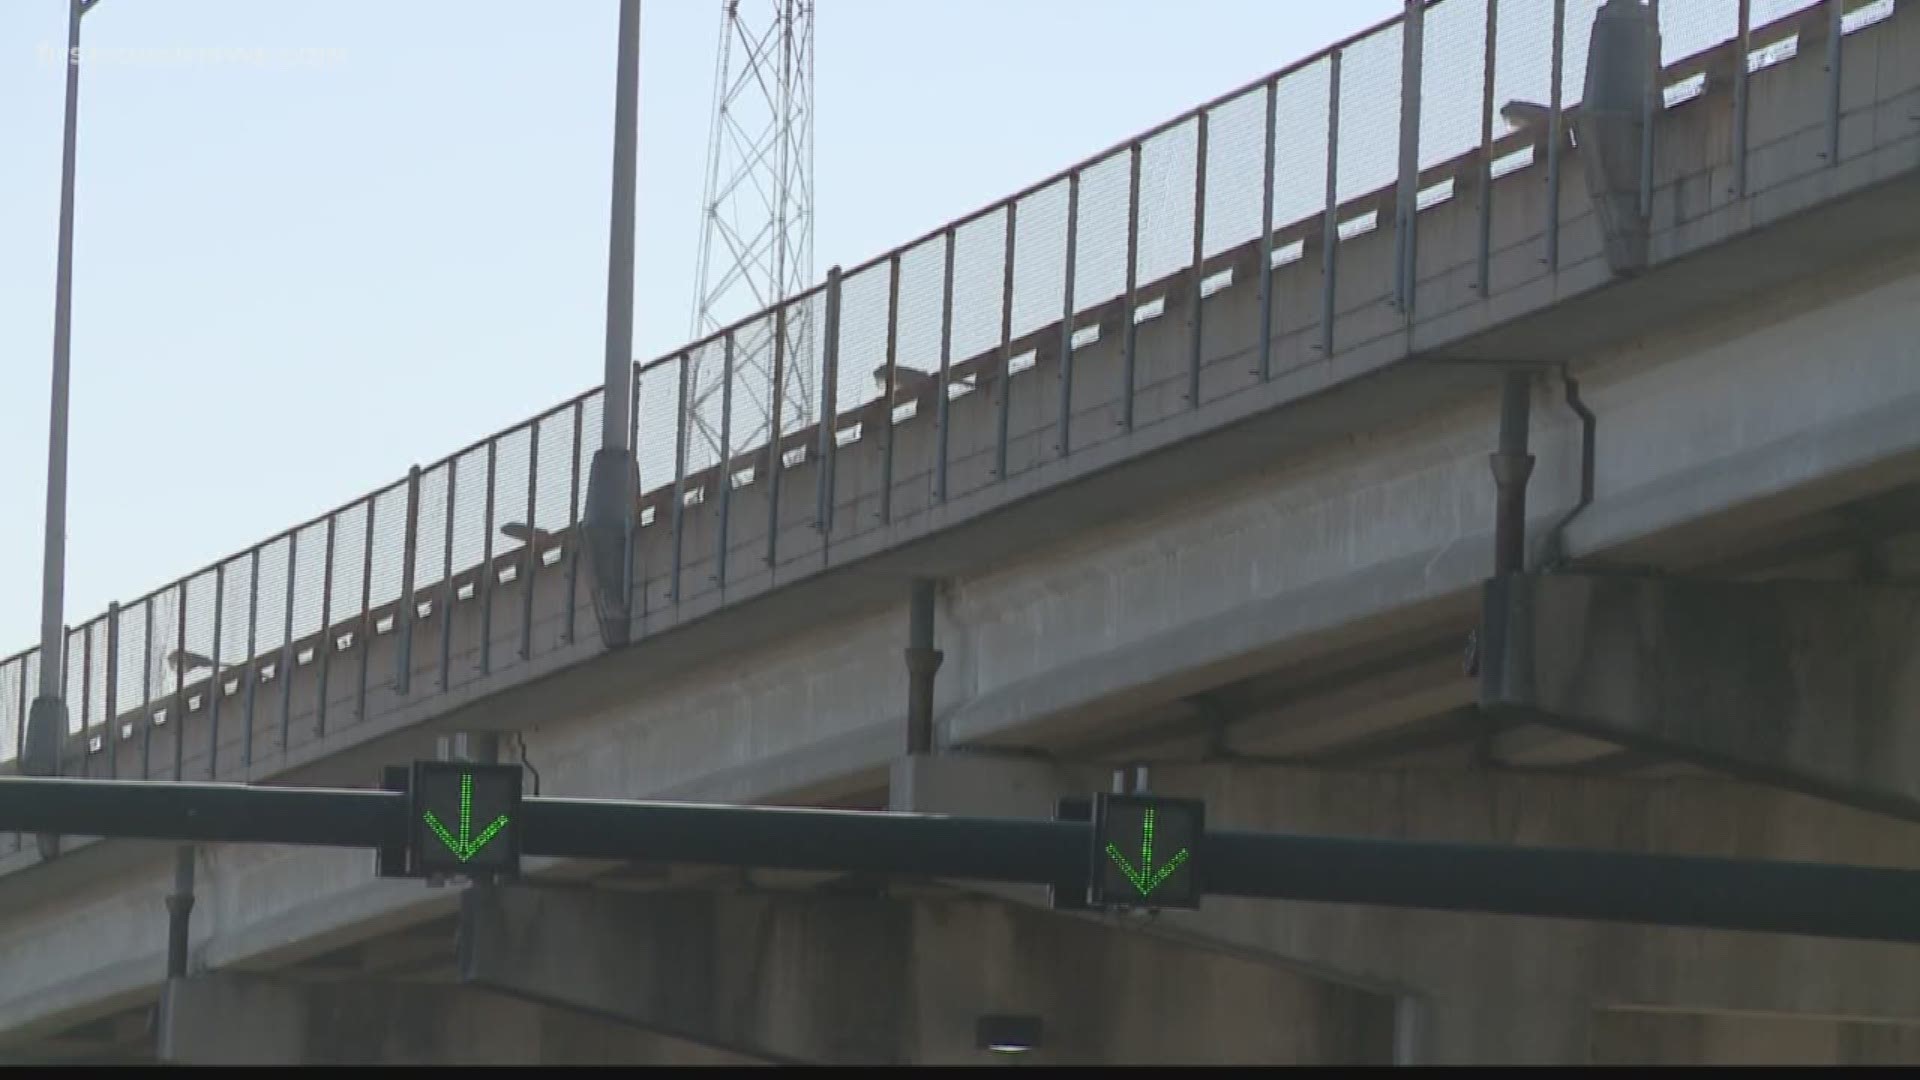 The lowest asking price to remove the Hart Bridge is around $25 million, while the highest is $32 million for a project expected to start this year.